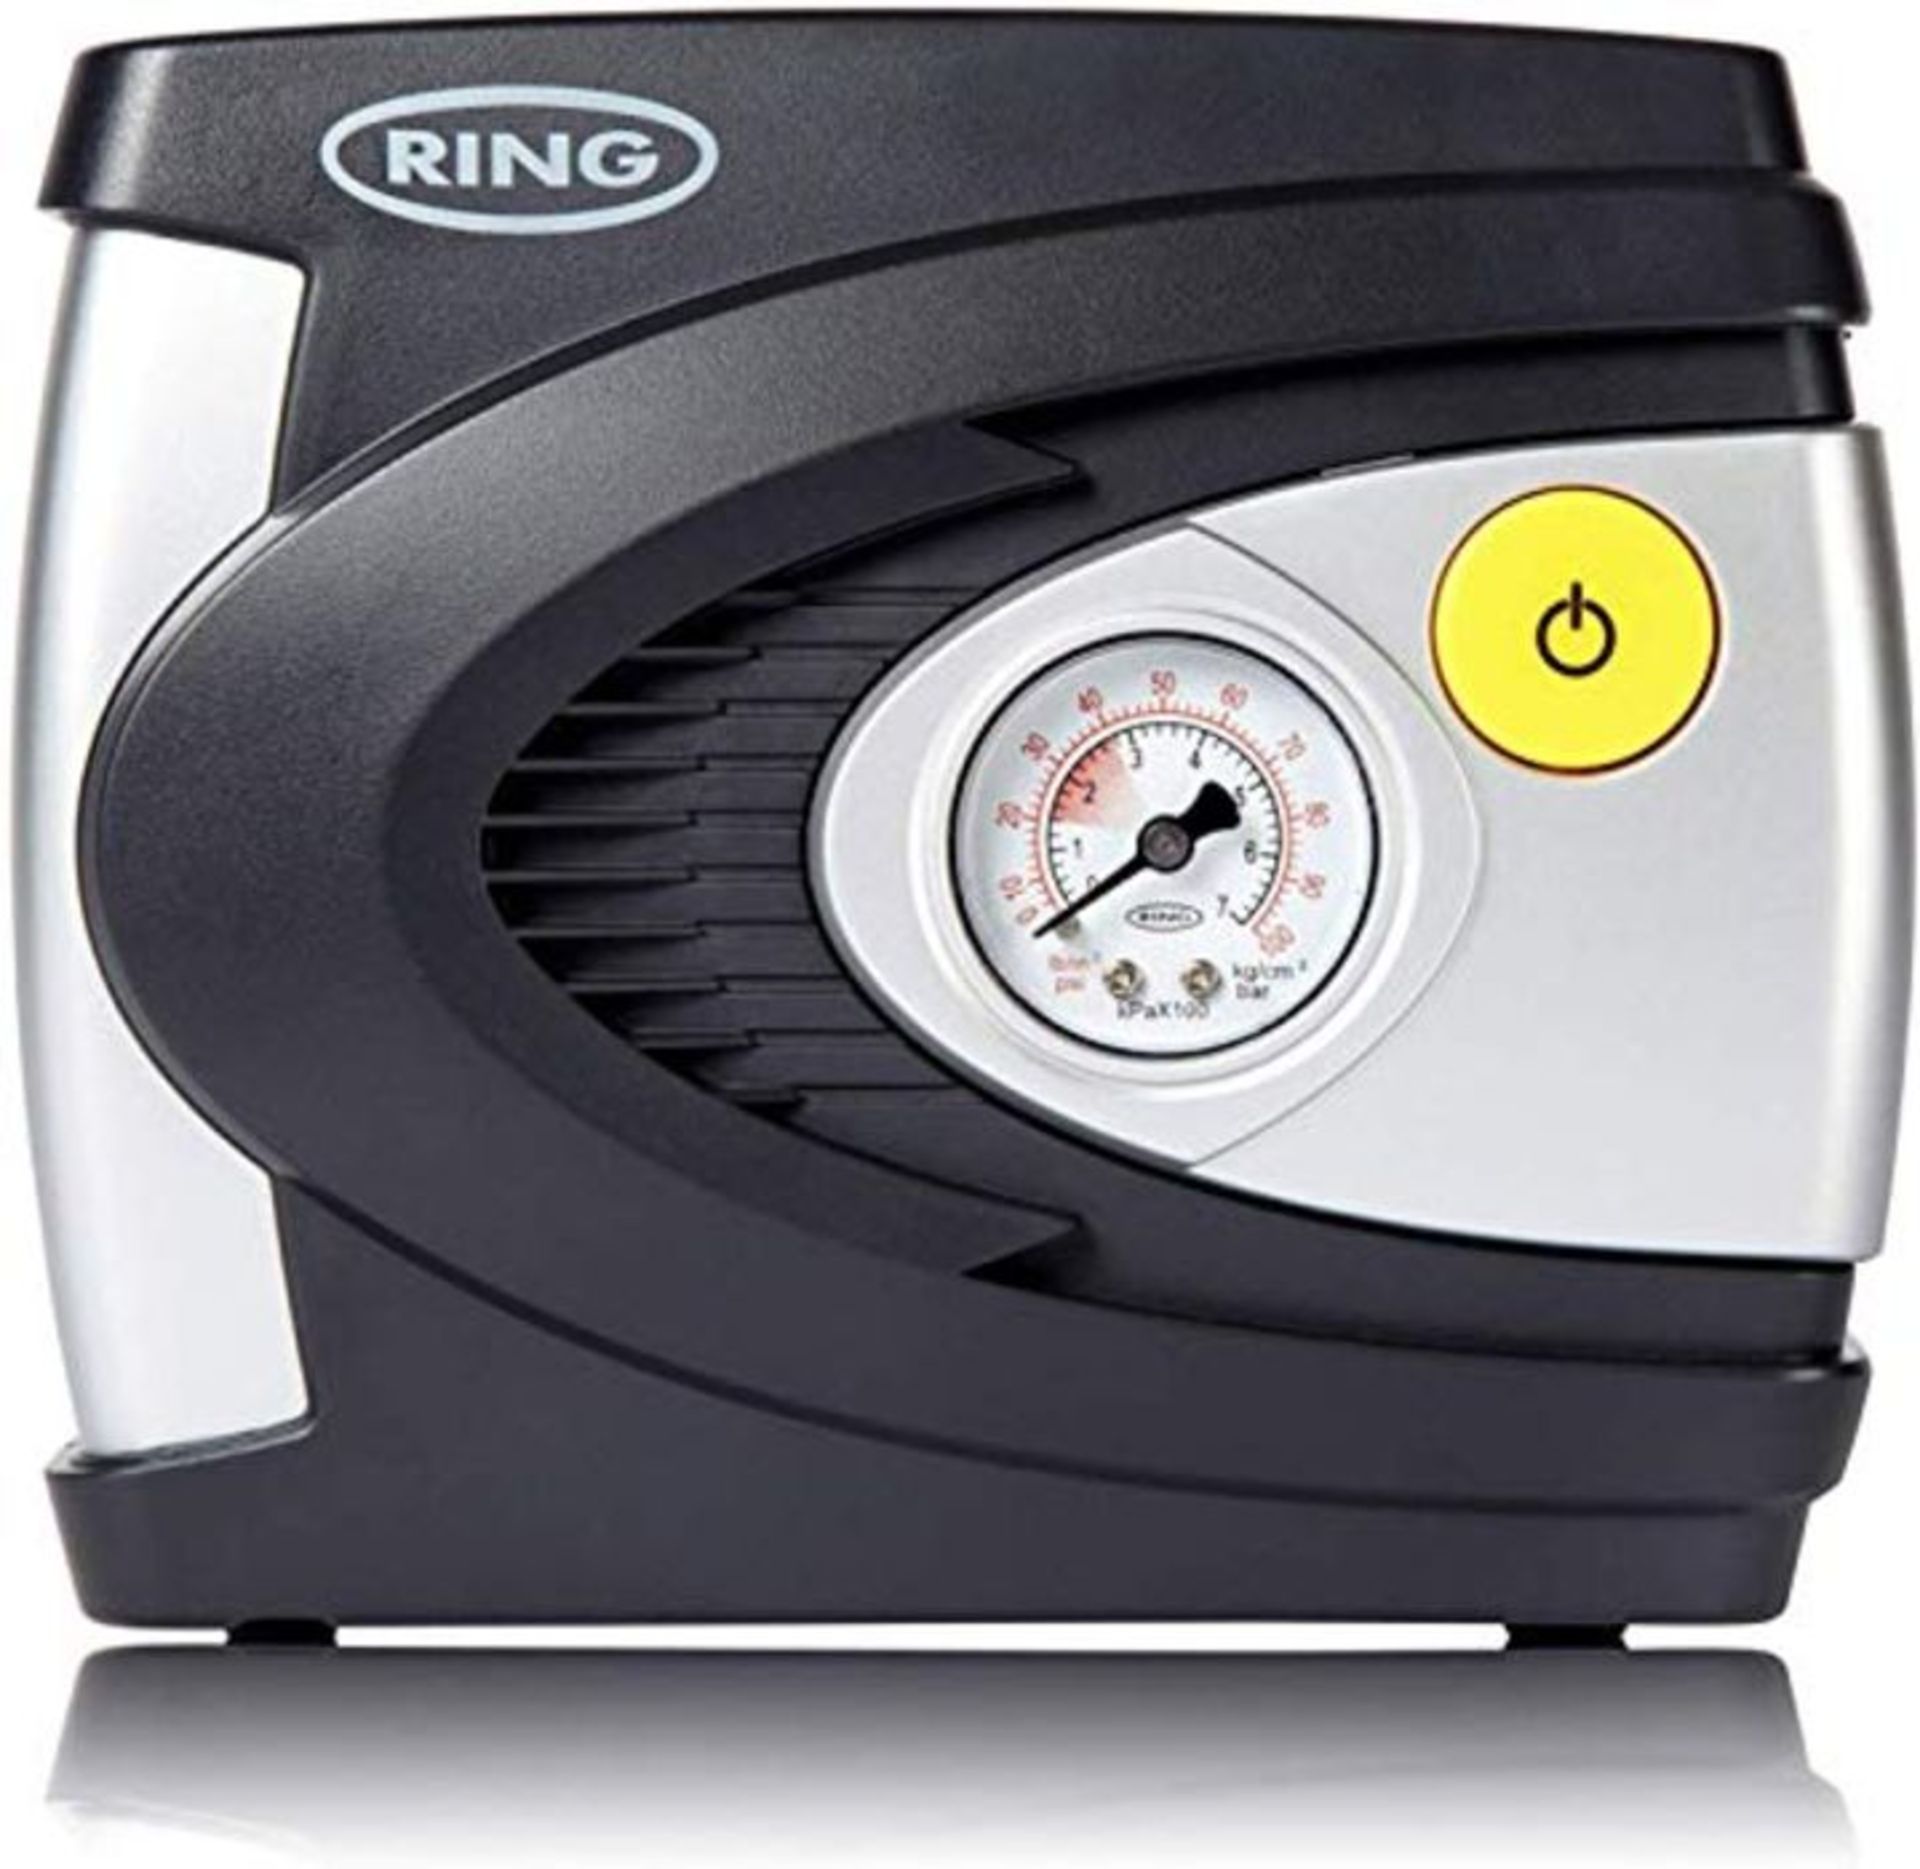 Ring RAC610 12V Analogue Tyre Inflator, Air Compressor Tyre Pump, 4.5 Min Tyre Inflati